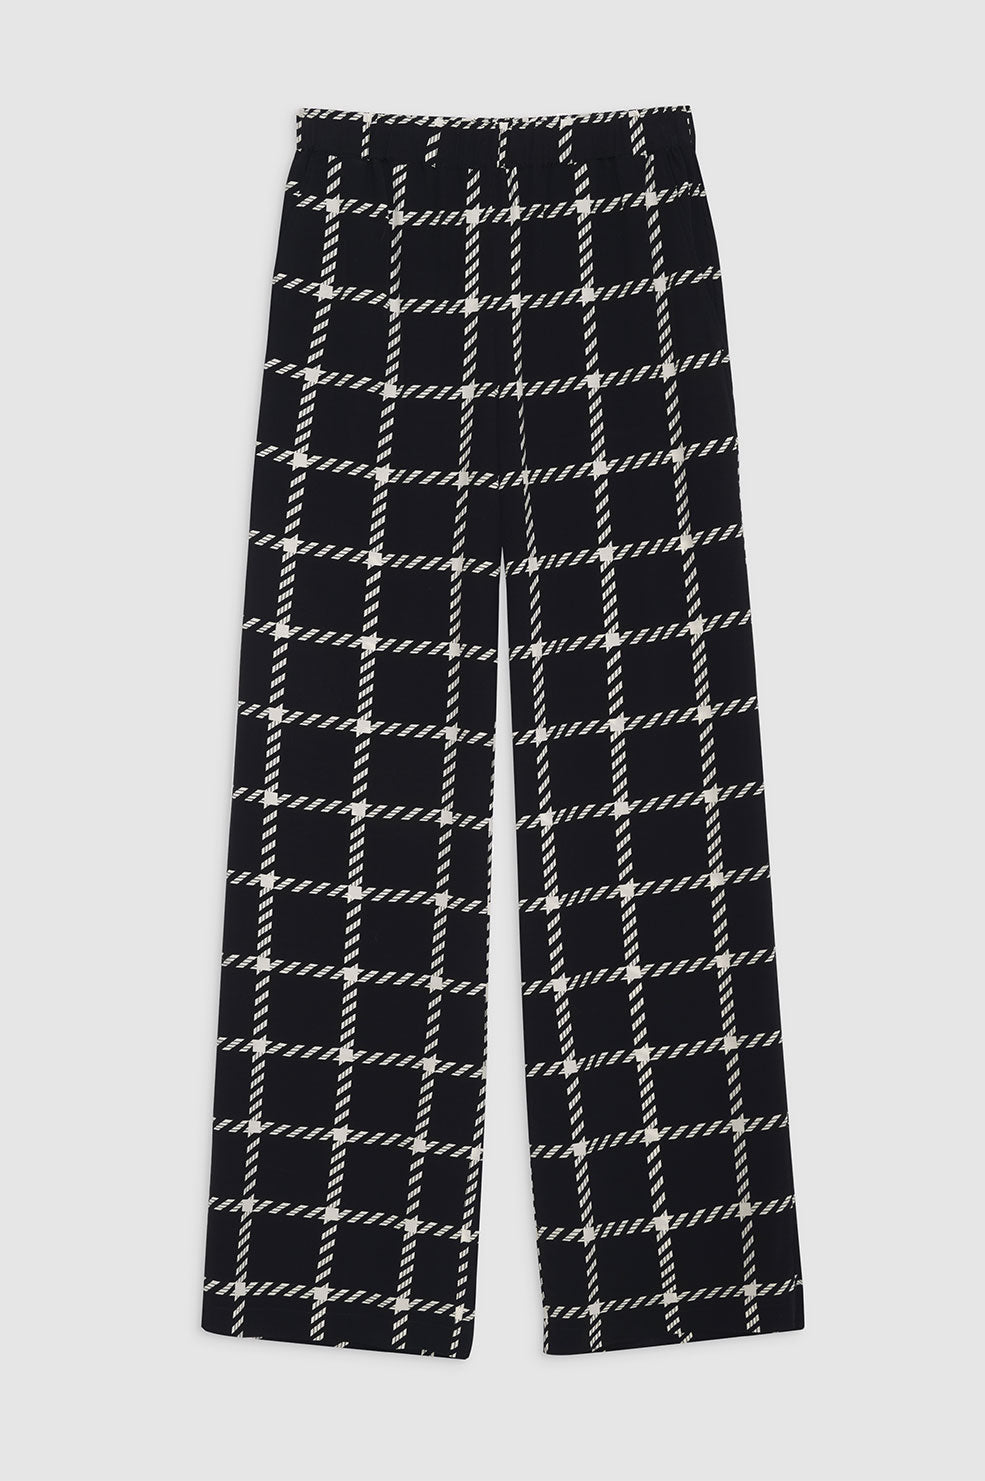 ANINE BING Owen Pant - Black And White Plaid - Front View